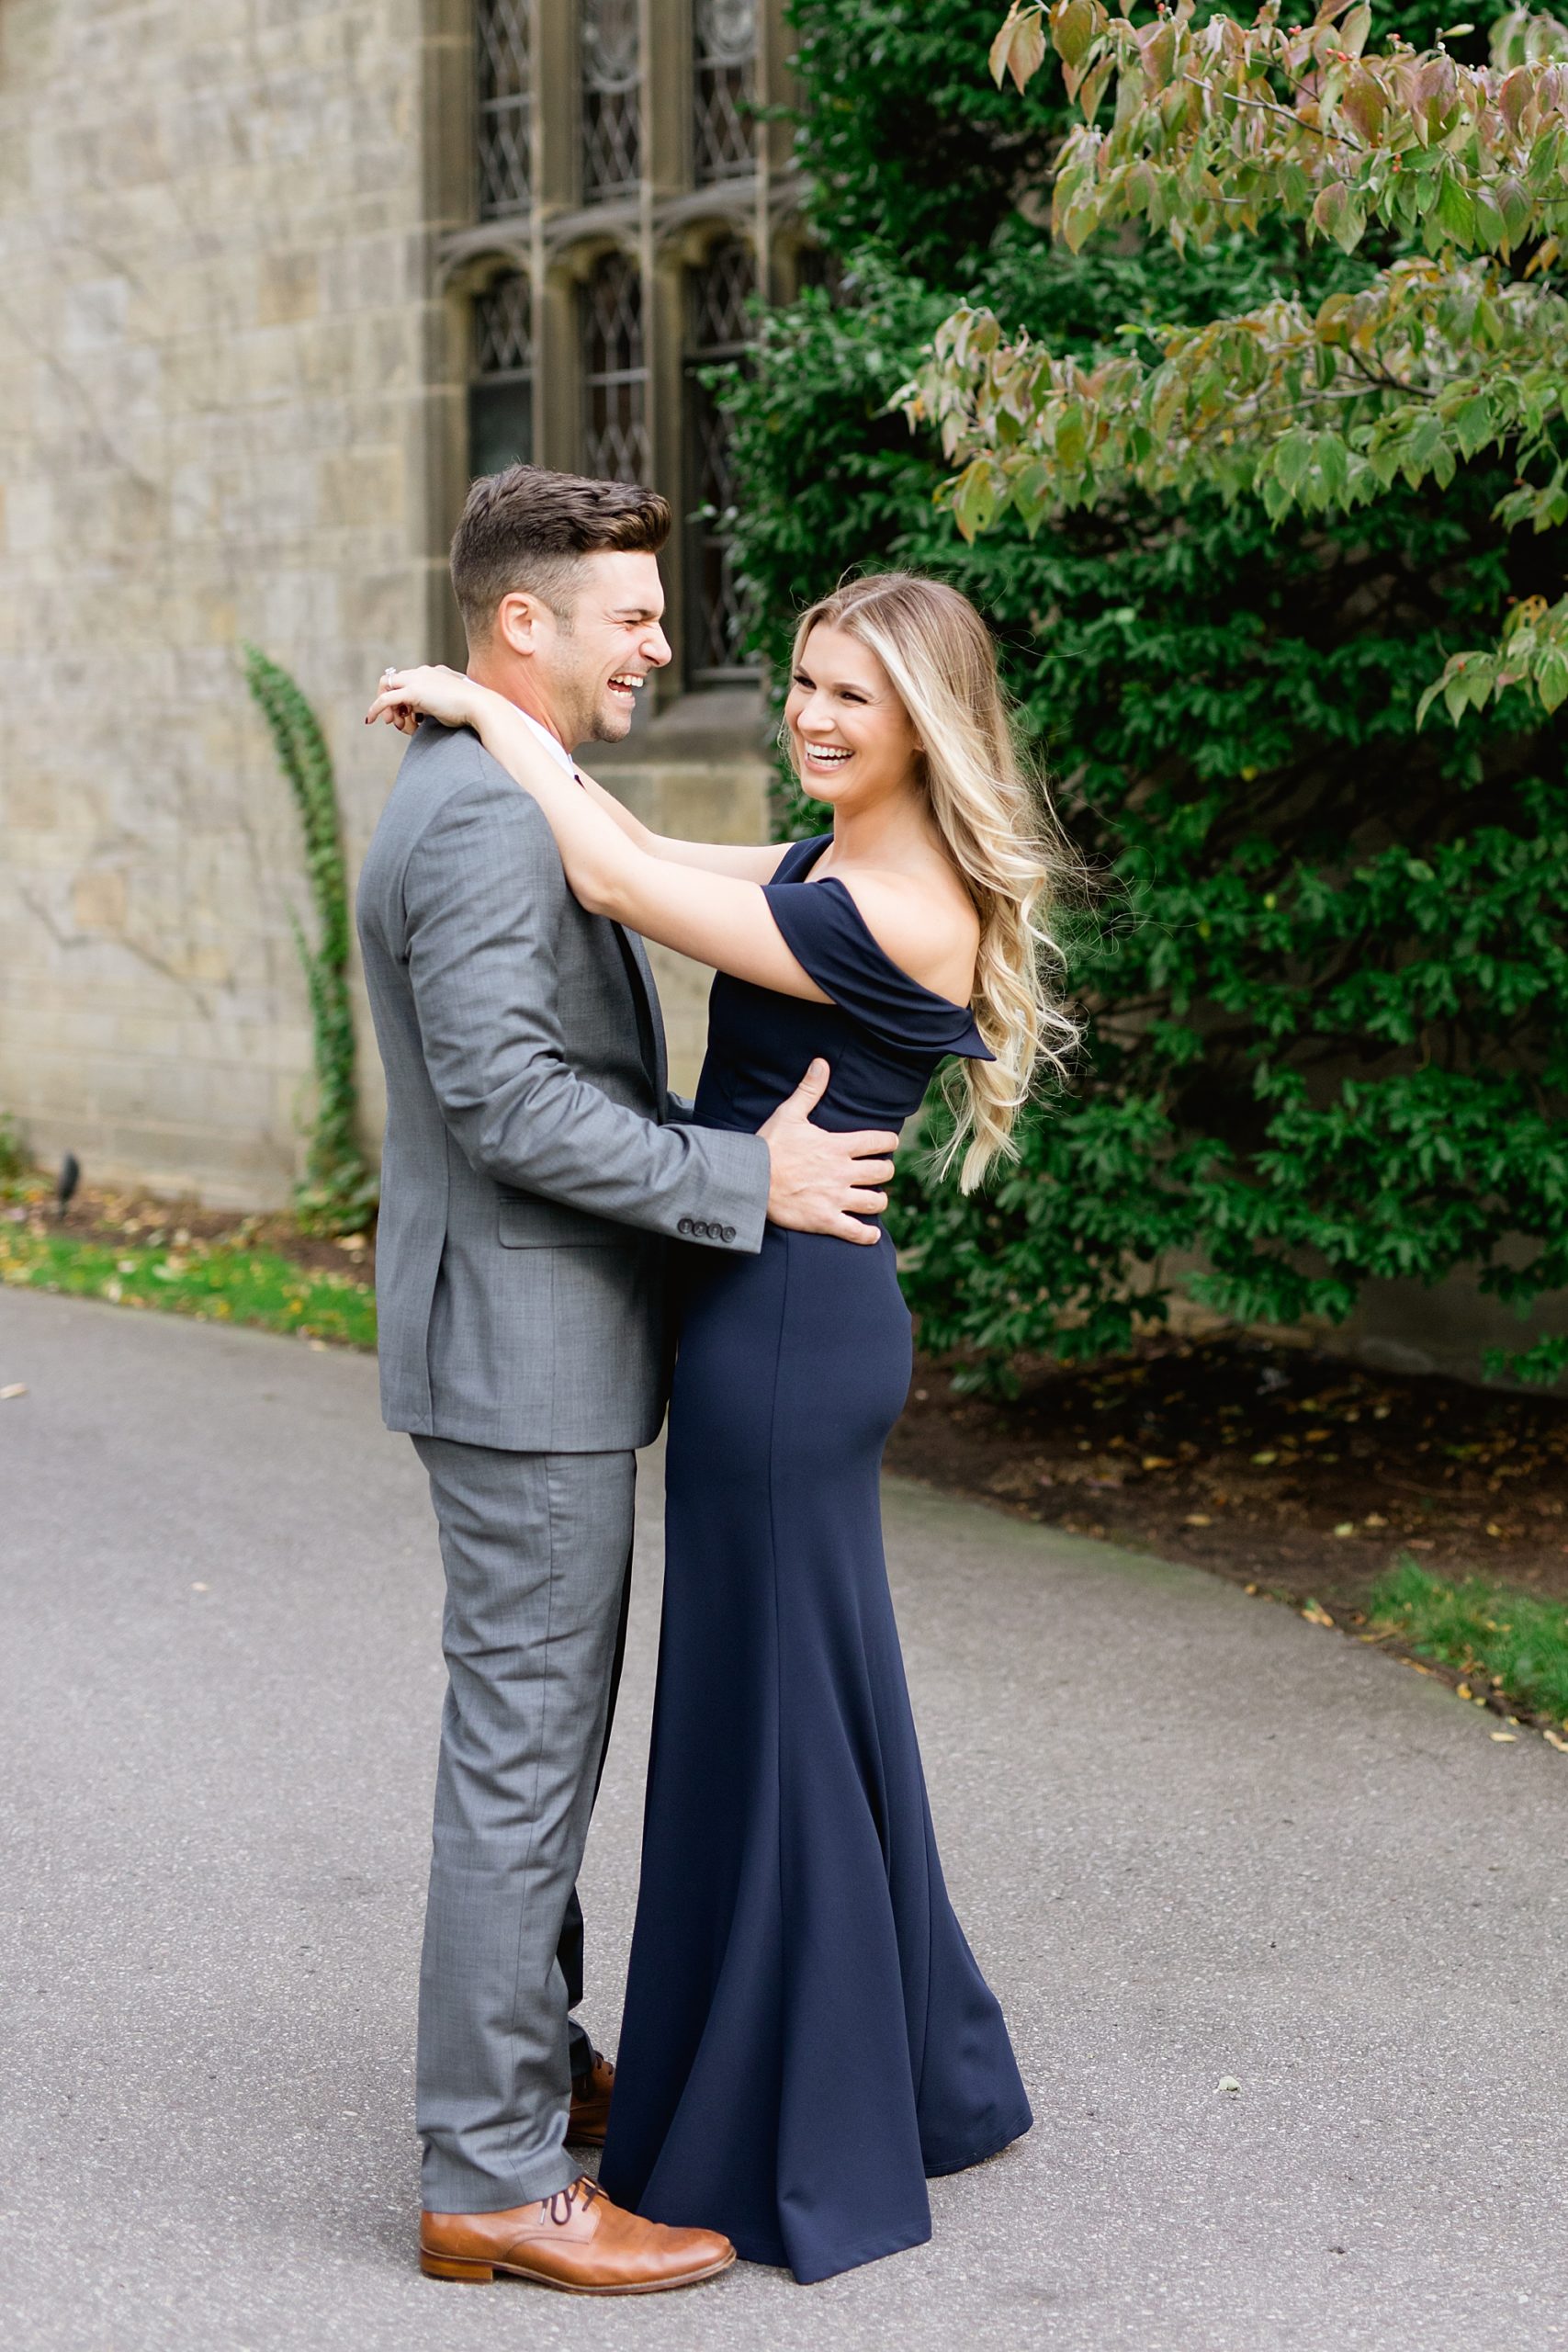 Formal style engagement shoot | Breanne Rochelle Photography